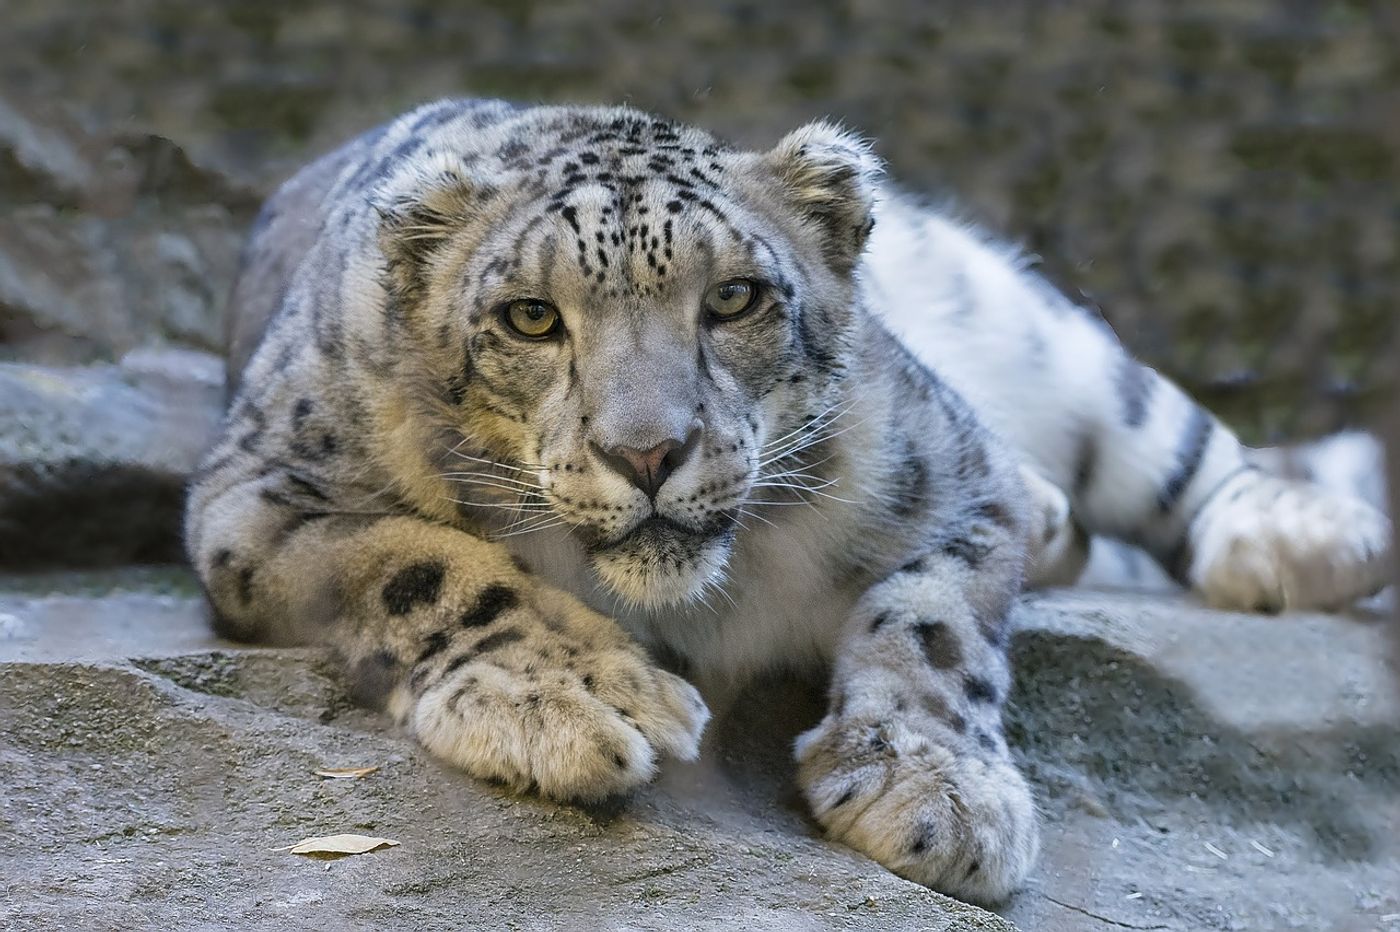 Snow leopards are considered an endangered species by the IUCN, but they might be downgraded to "vulnerable."